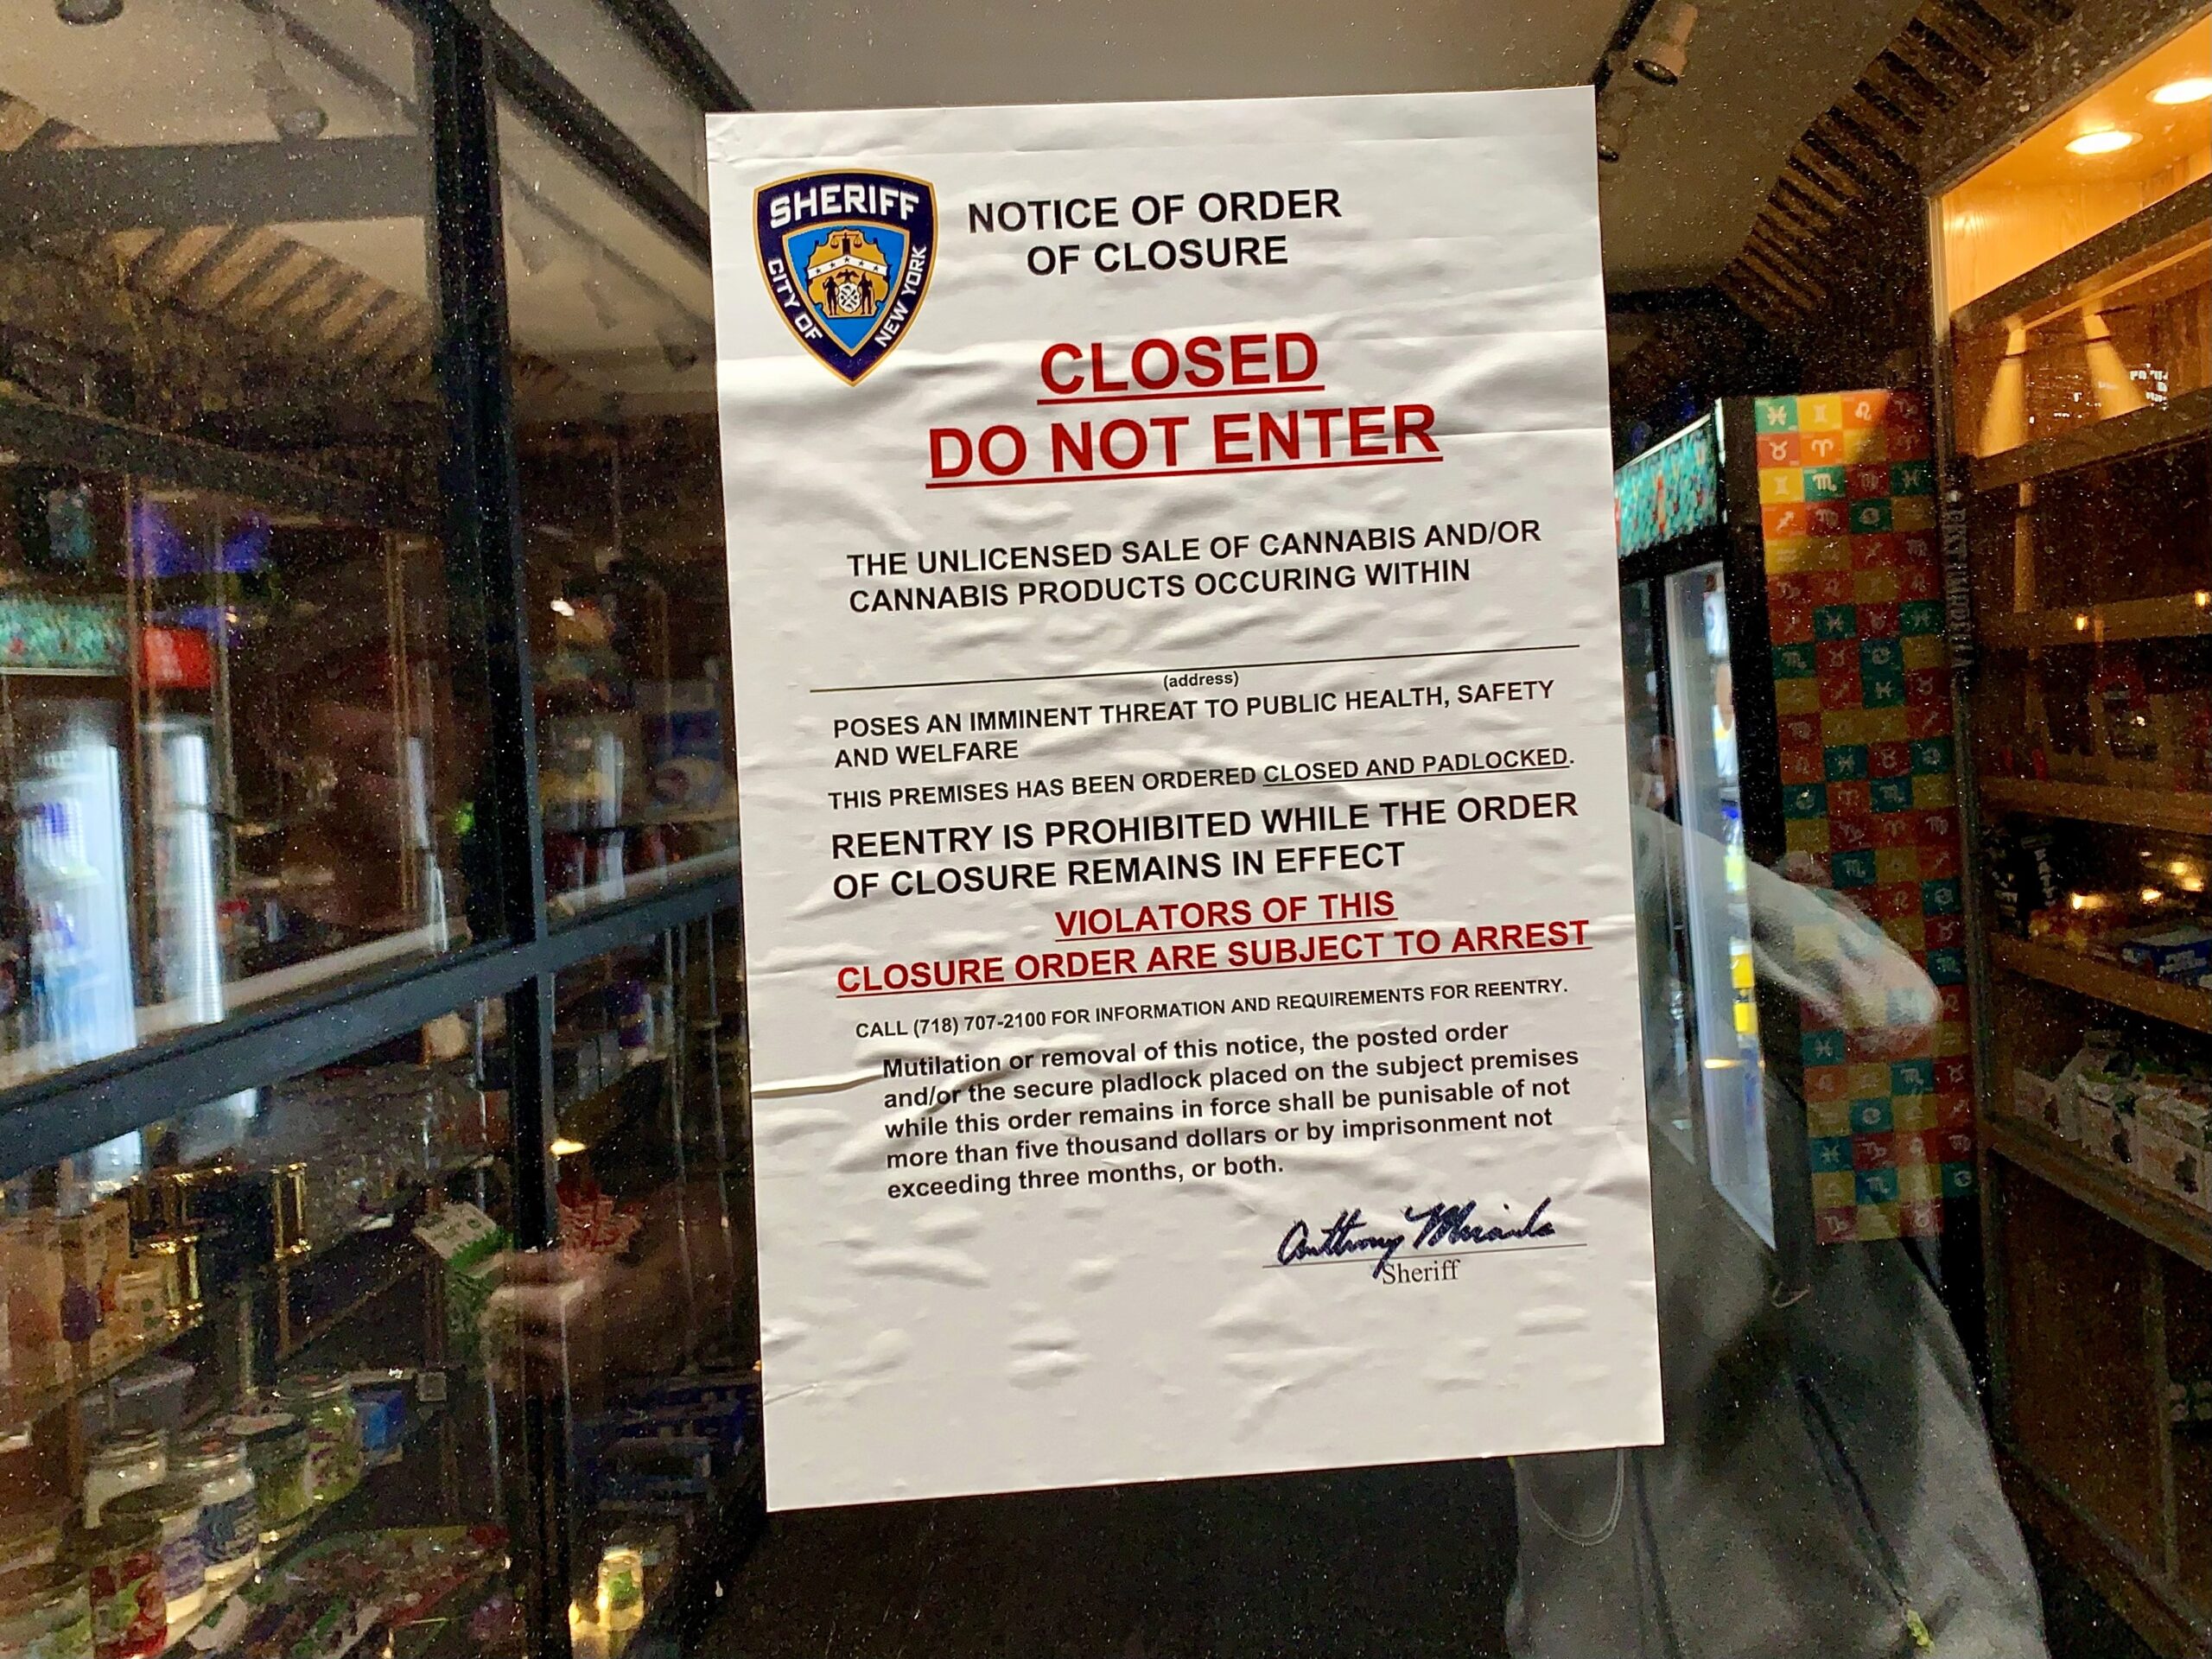 One of the signs posted by the NYC Sheriff on the door of the Exotic Smoke Shop (AKA Convenience and Organic Corporation) at 64 Henry St.